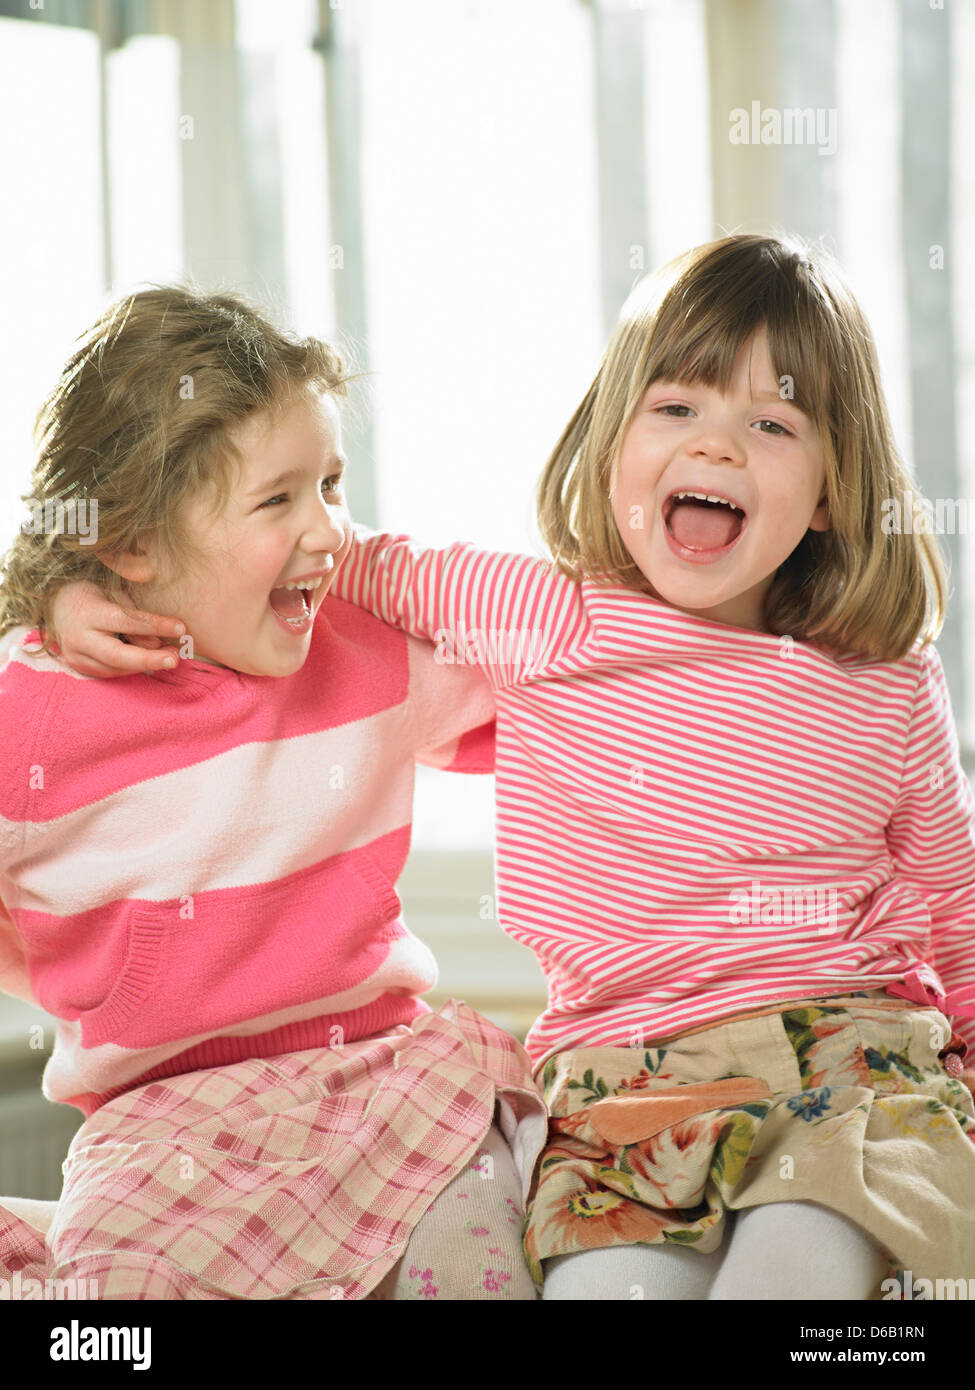 Girls smiling together indoors Stock Photo